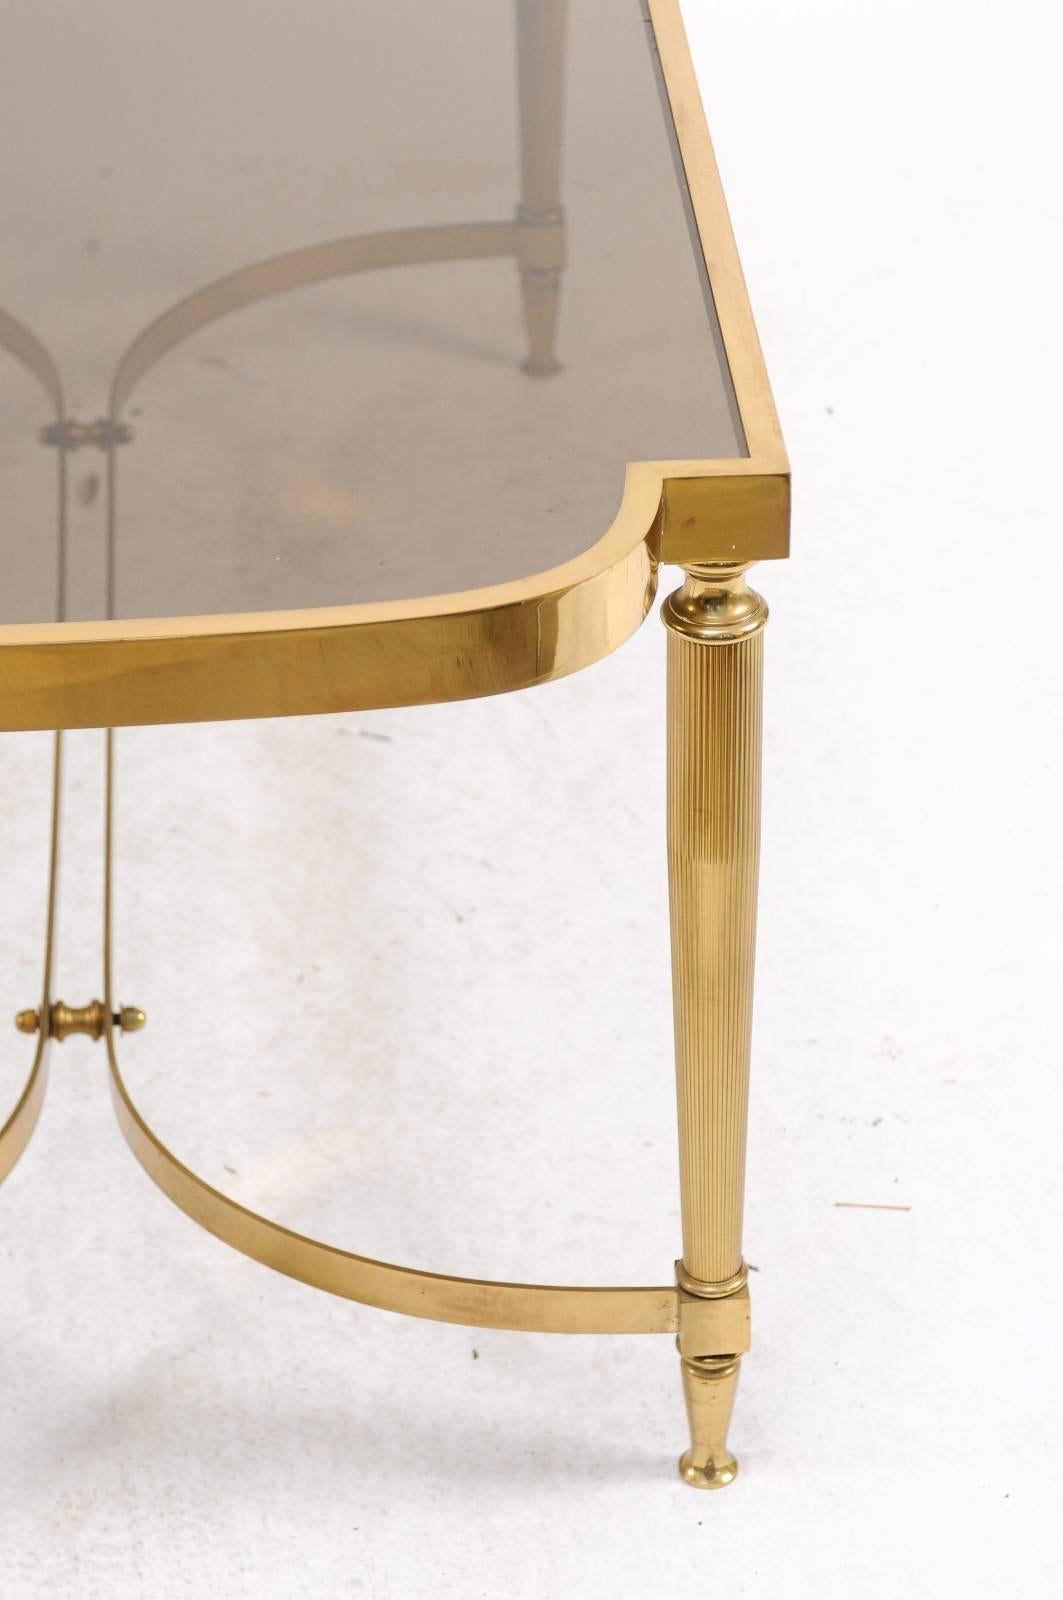 20th Century French Midcentury Modern Bronze Coffee Table with Smoked Glass and Reeded Legs